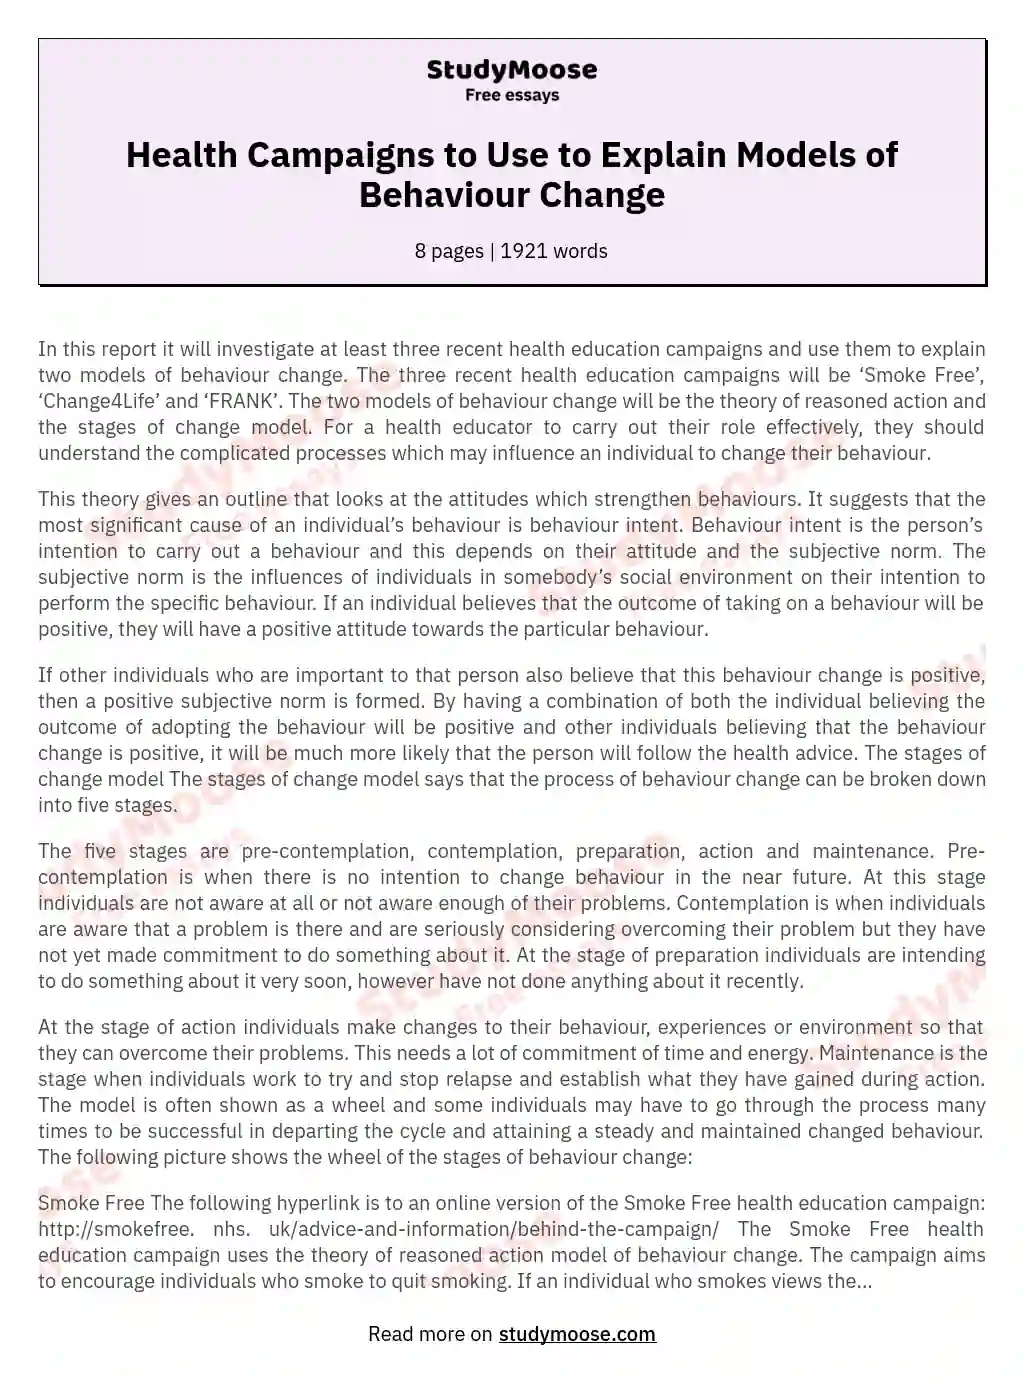 Health Campaigns to Use to Explain Models of Behaviour Change essay